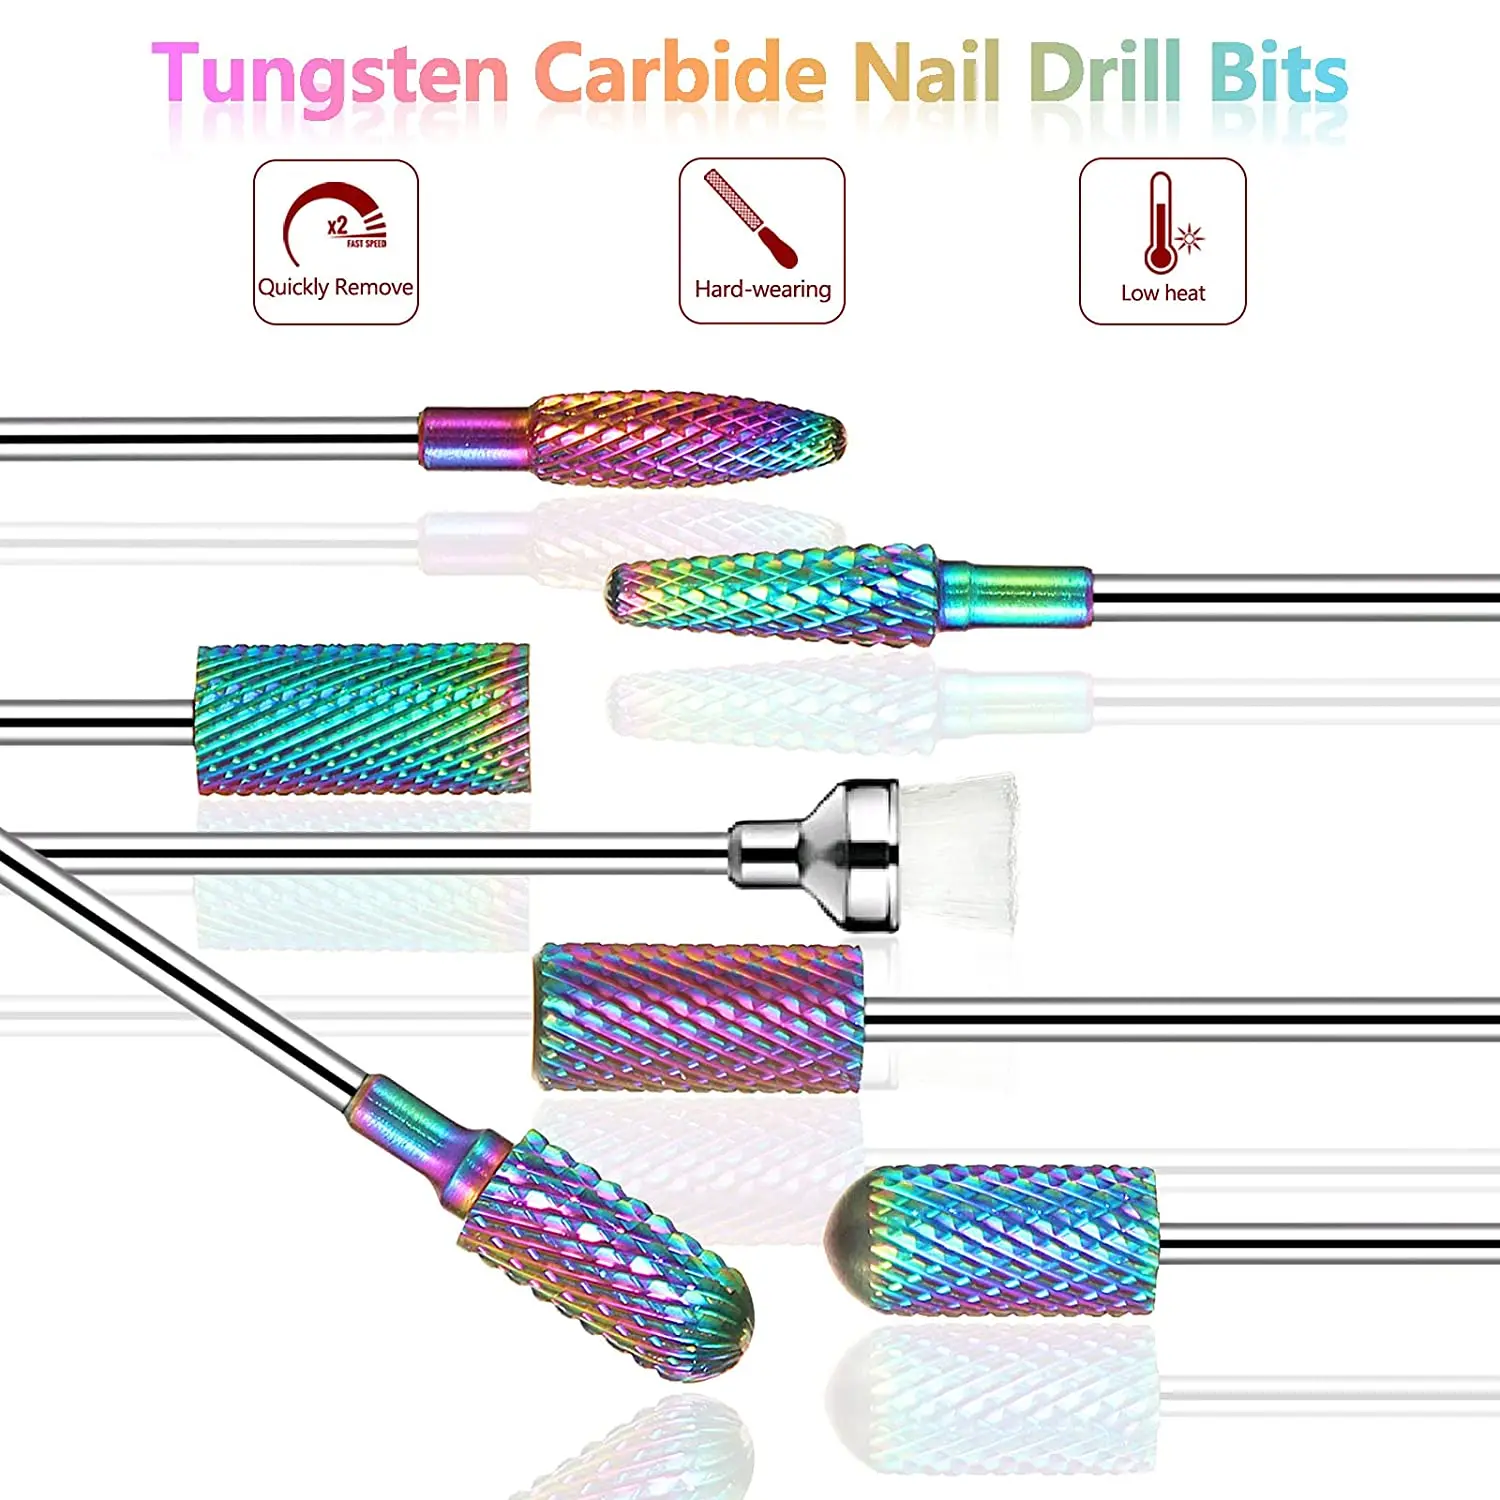 7 Pcs Tungsten Carbide Milling Cutter For Manicure Color-Plated Nail Drill Bits Acrylic Gel Cuticle Pedicure Remove Tools enlarge